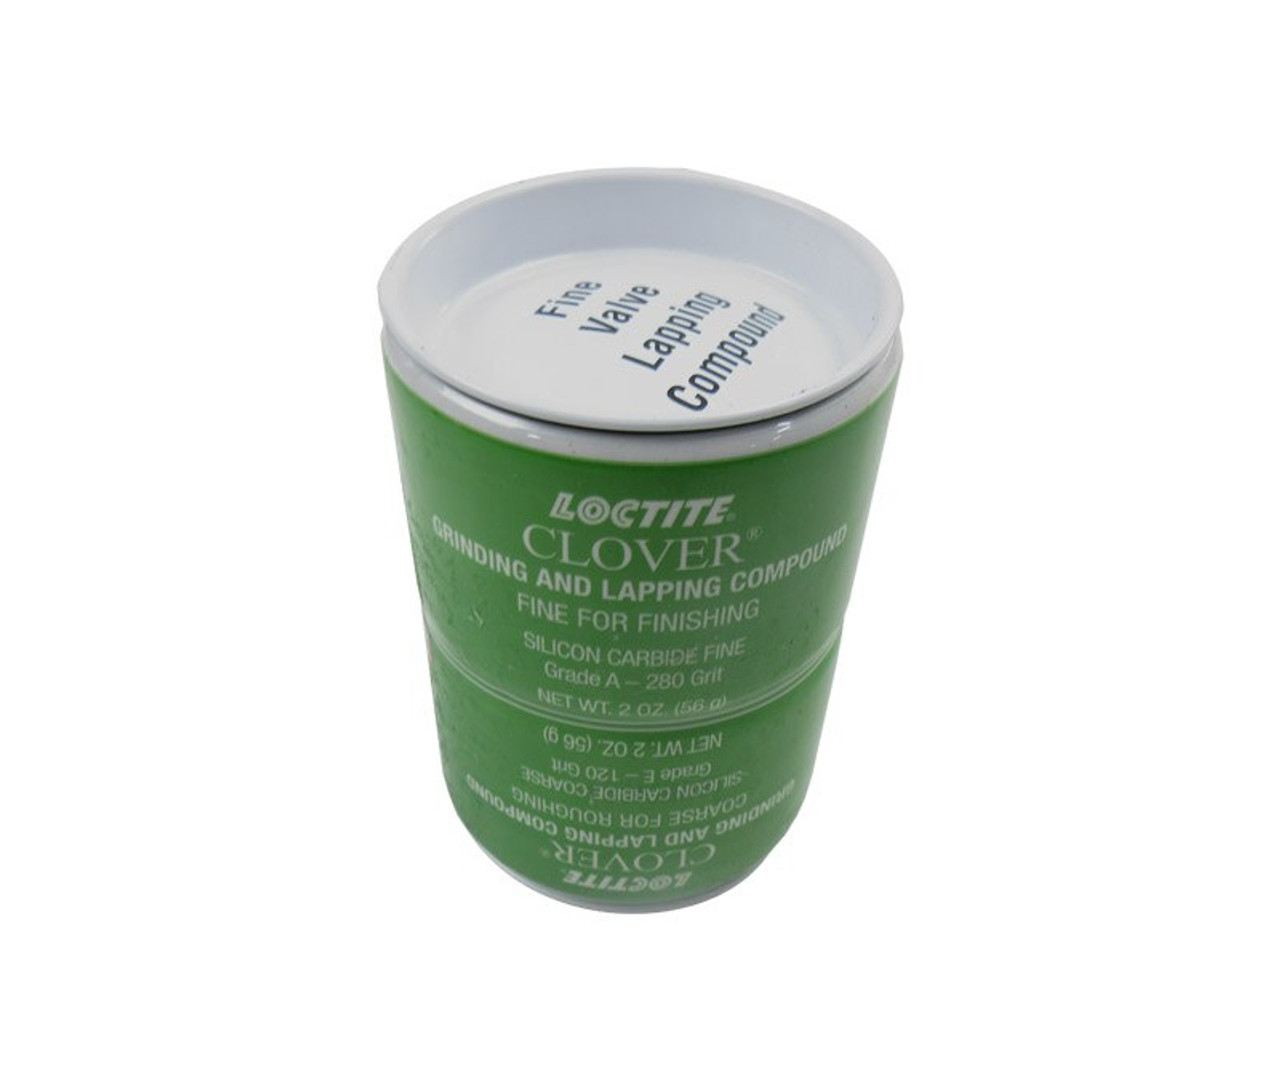 Loctite Clover© Lapping & Grinding Compound 280 grit - 2 oz.